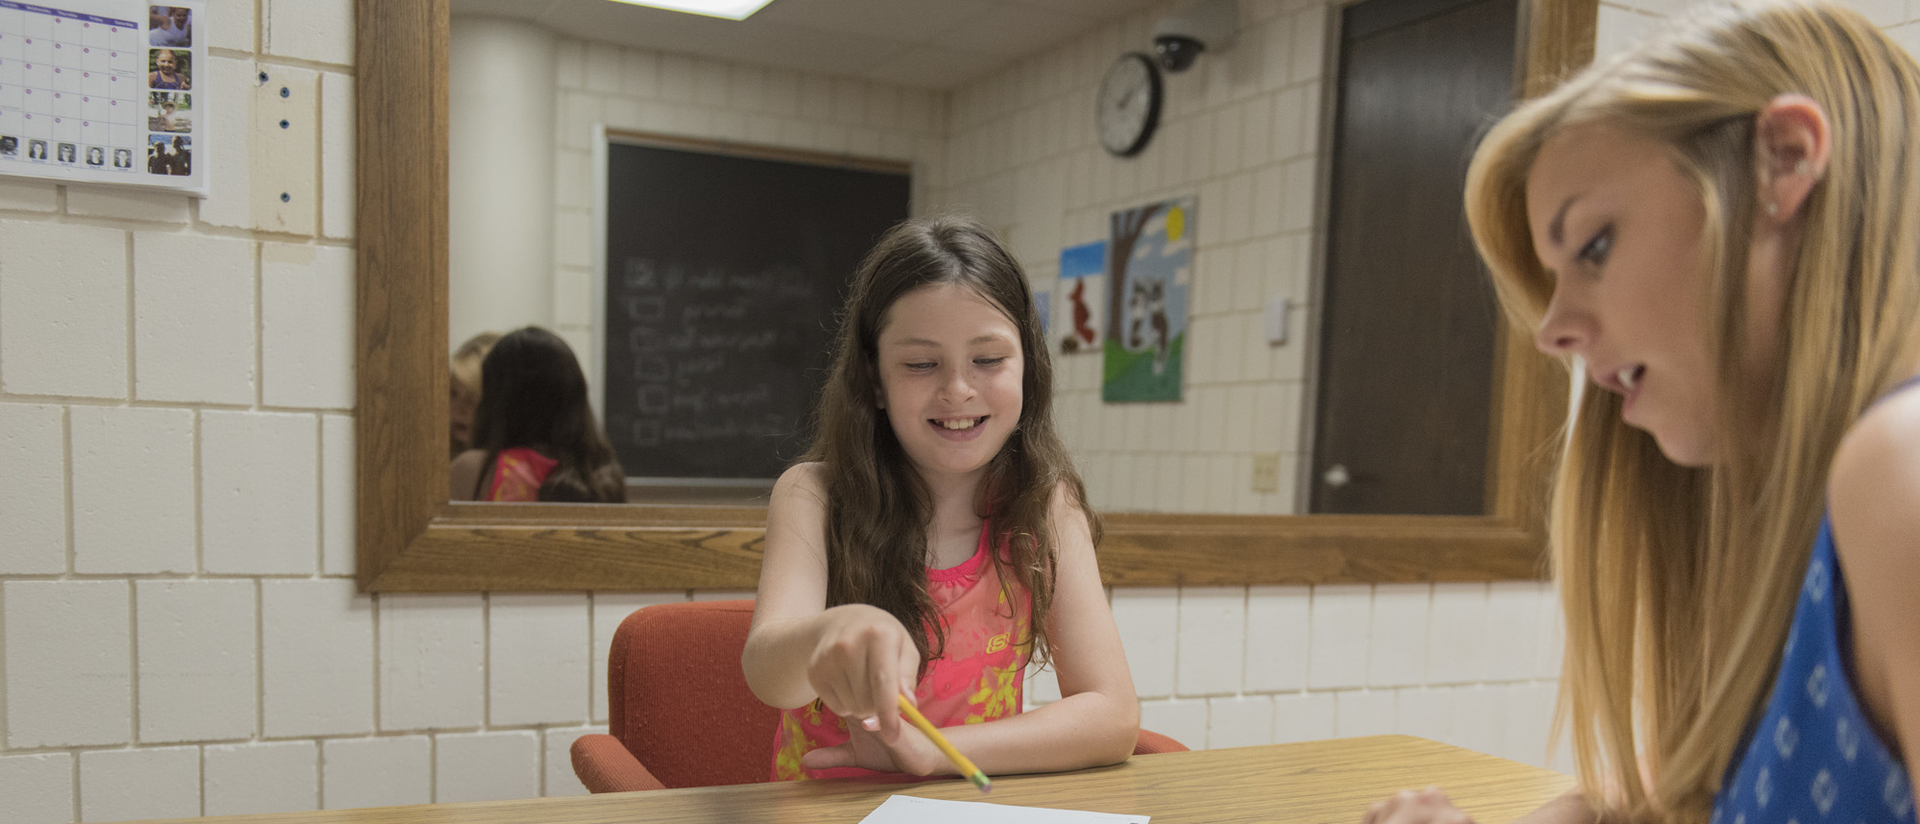 Sophie Topper, 9, is building her math skills and confidence through her work with school psychology graduate student Jill Heitman.